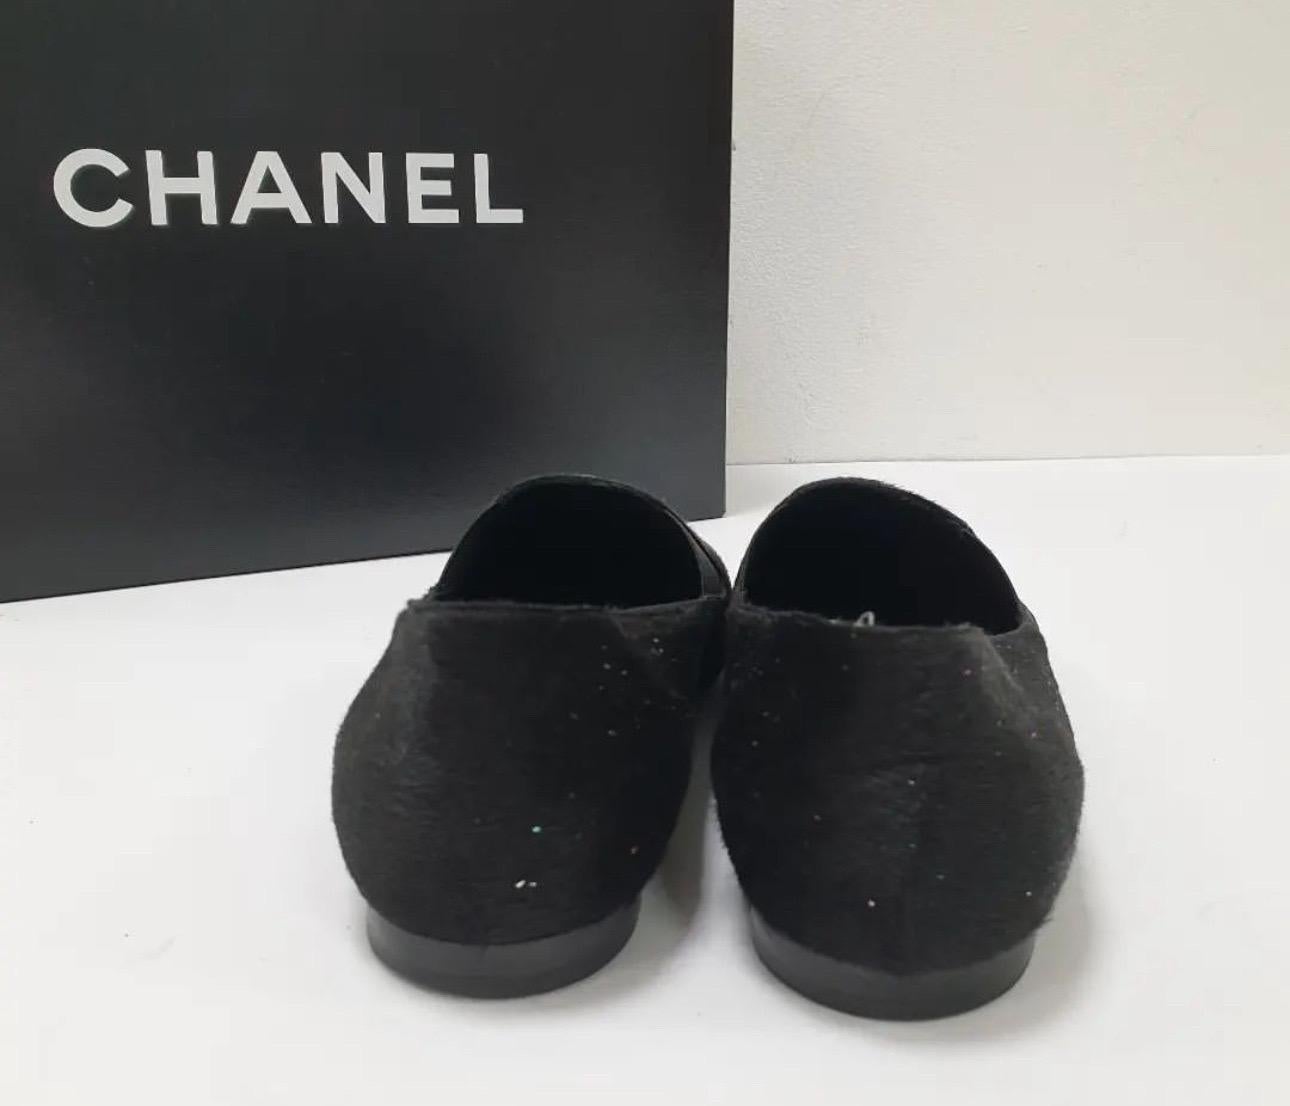 Chanel CC Loafers in size 37.5

- Black pony fur

- Chanel logo on the point of toes in silver

- Elastic around the breath of the shoes for comfortability

Very good condition.

No box. No dust bag.